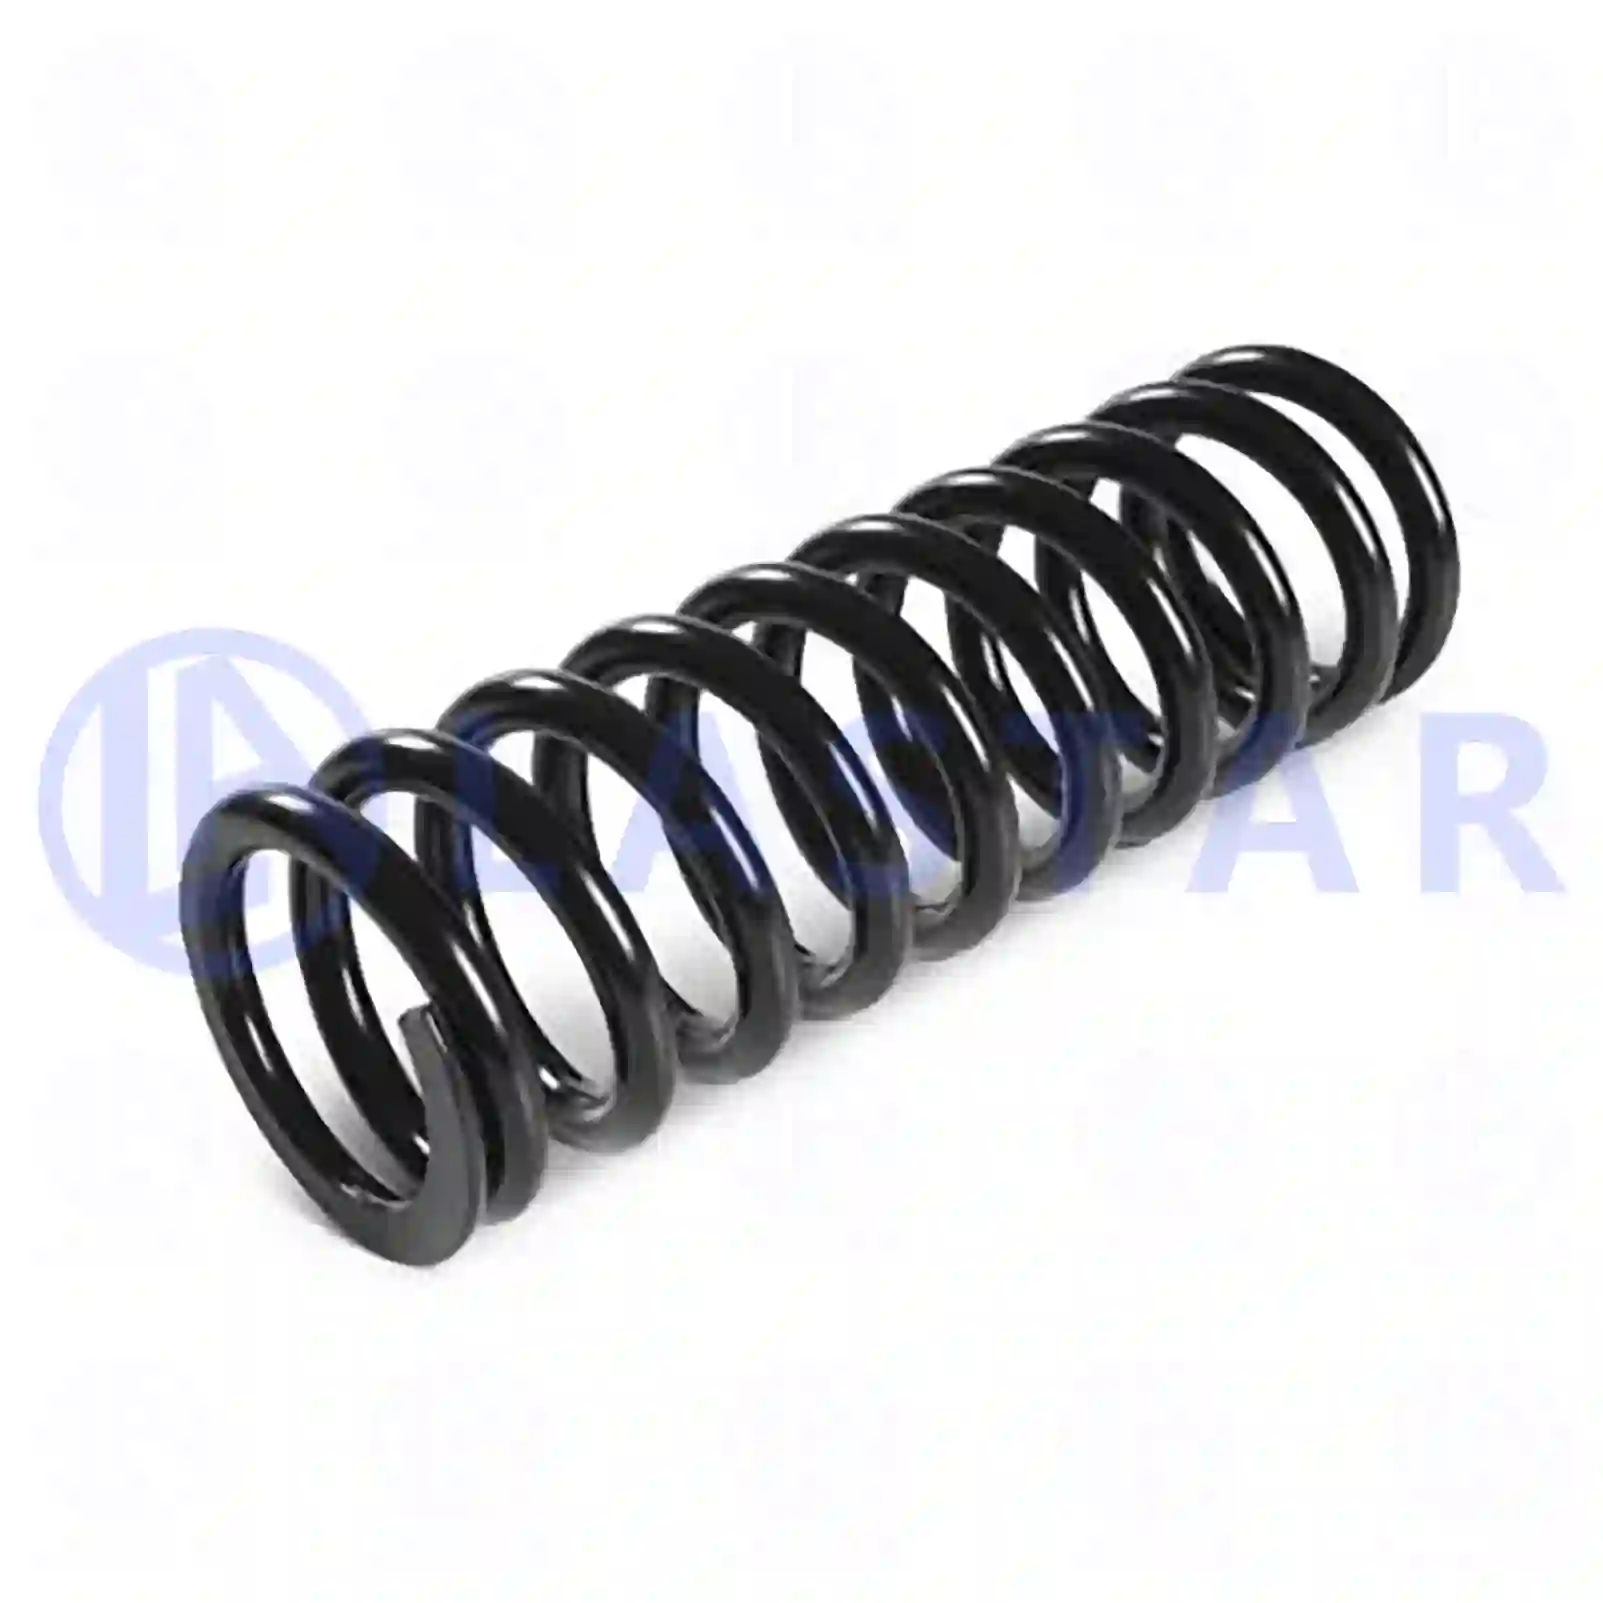 Spring, cabin shock absorber, 77735775, 7401075355, 1075355, ZG41665-0008, , ||  77735775 Lastar Spare Part | Truck Spare Parts, Auotomotive Spare Parts Spring, cabin shock absorber, 77735775, 7401075355, 1075355, ZG41665-0008, , ||  77735775 Lastar Spare Part | Truck Spare Parts, Auotomotive Spare Parts